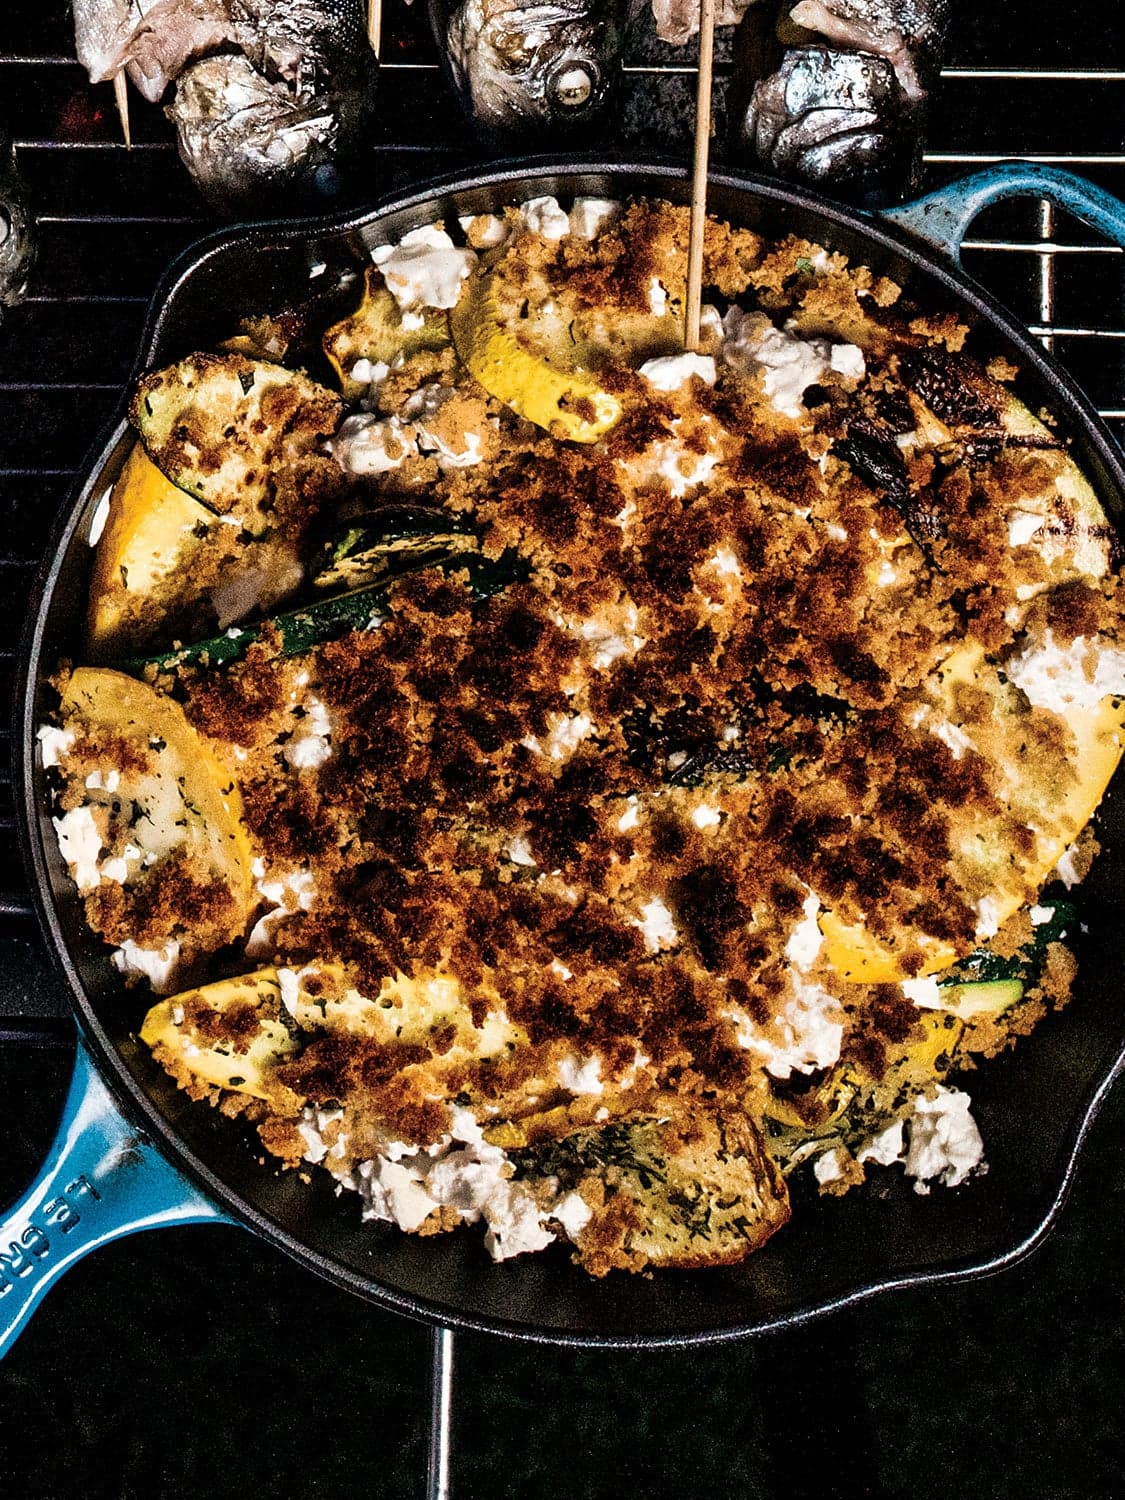 Skillet-Roasted Squash with Oregano, Mint, and Cheese